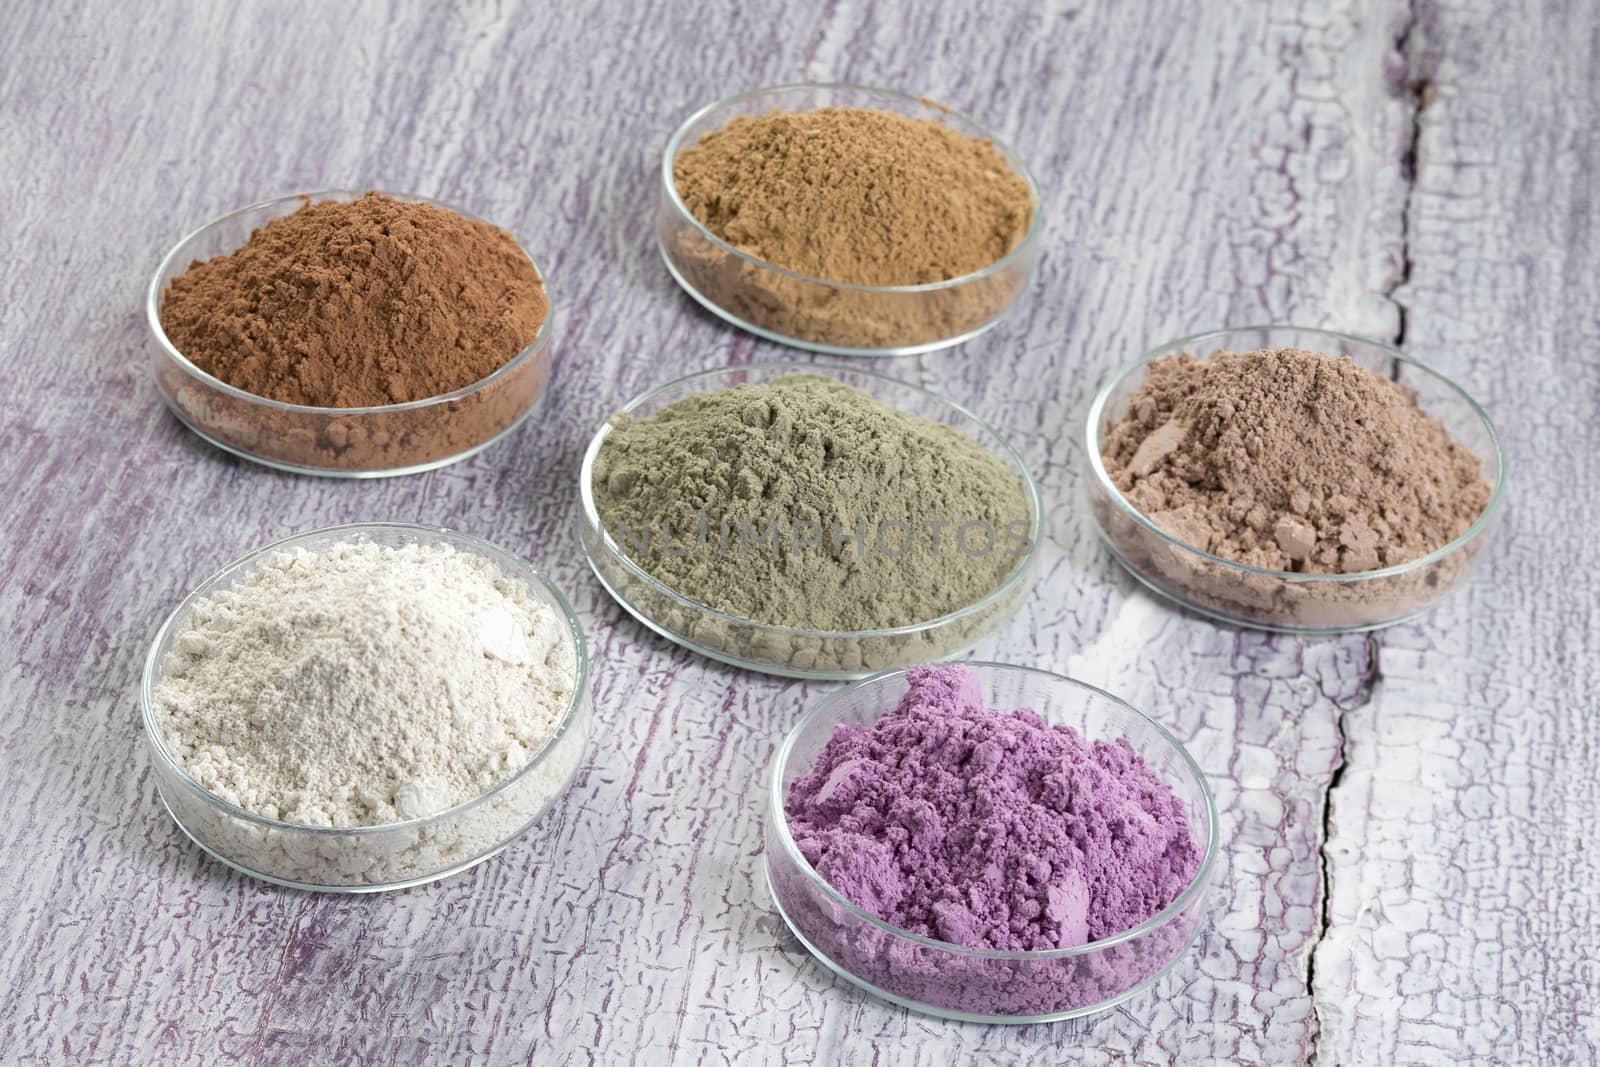 cosmetic clay/: yellow, purple, pink, red, white, green for Spa and bodycare